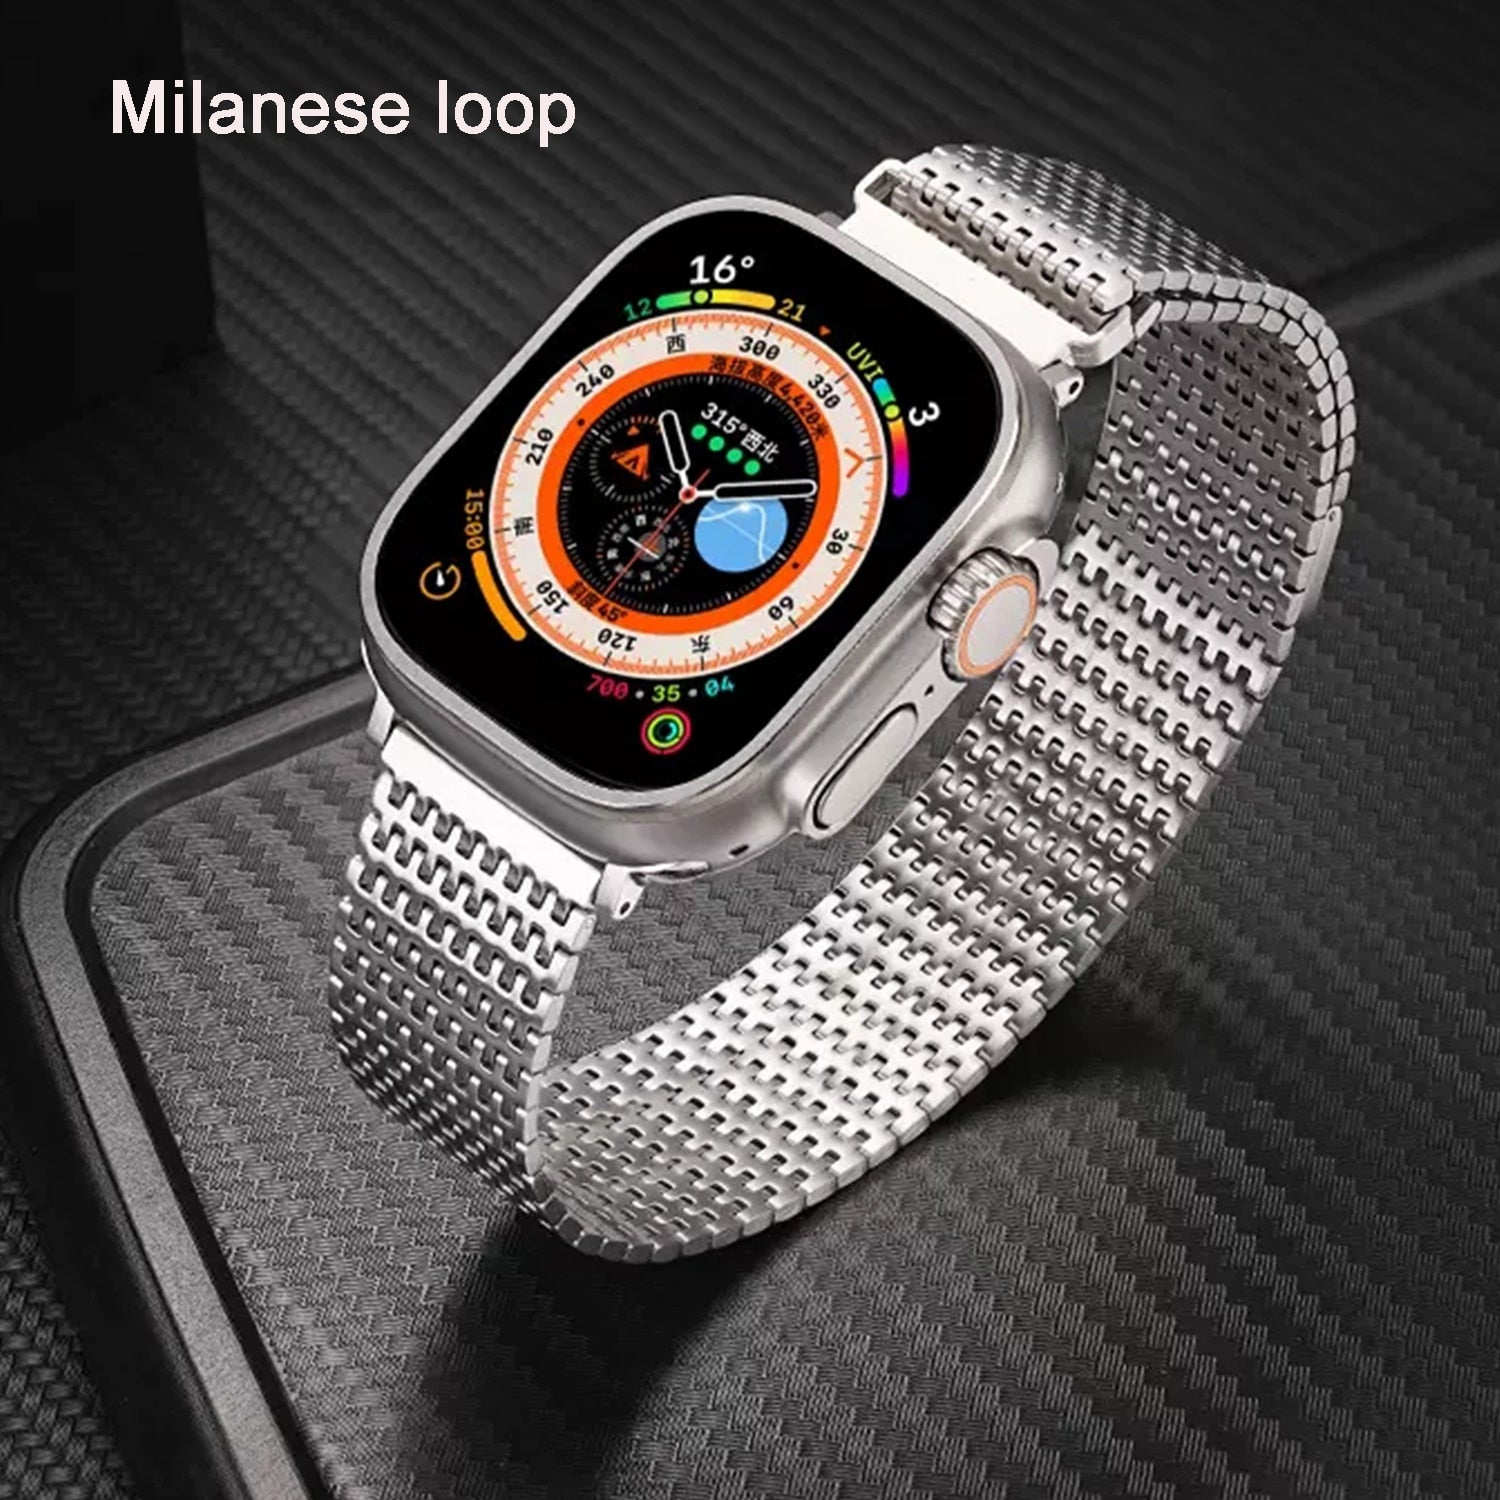 Stainless Steel Magnetic Band Compatible with Apple Watch Band 38mm 40mm  41mm 42mm 44mm 45mm 49mm, Adjustable Mesh Loop Strap, Metal Milanese